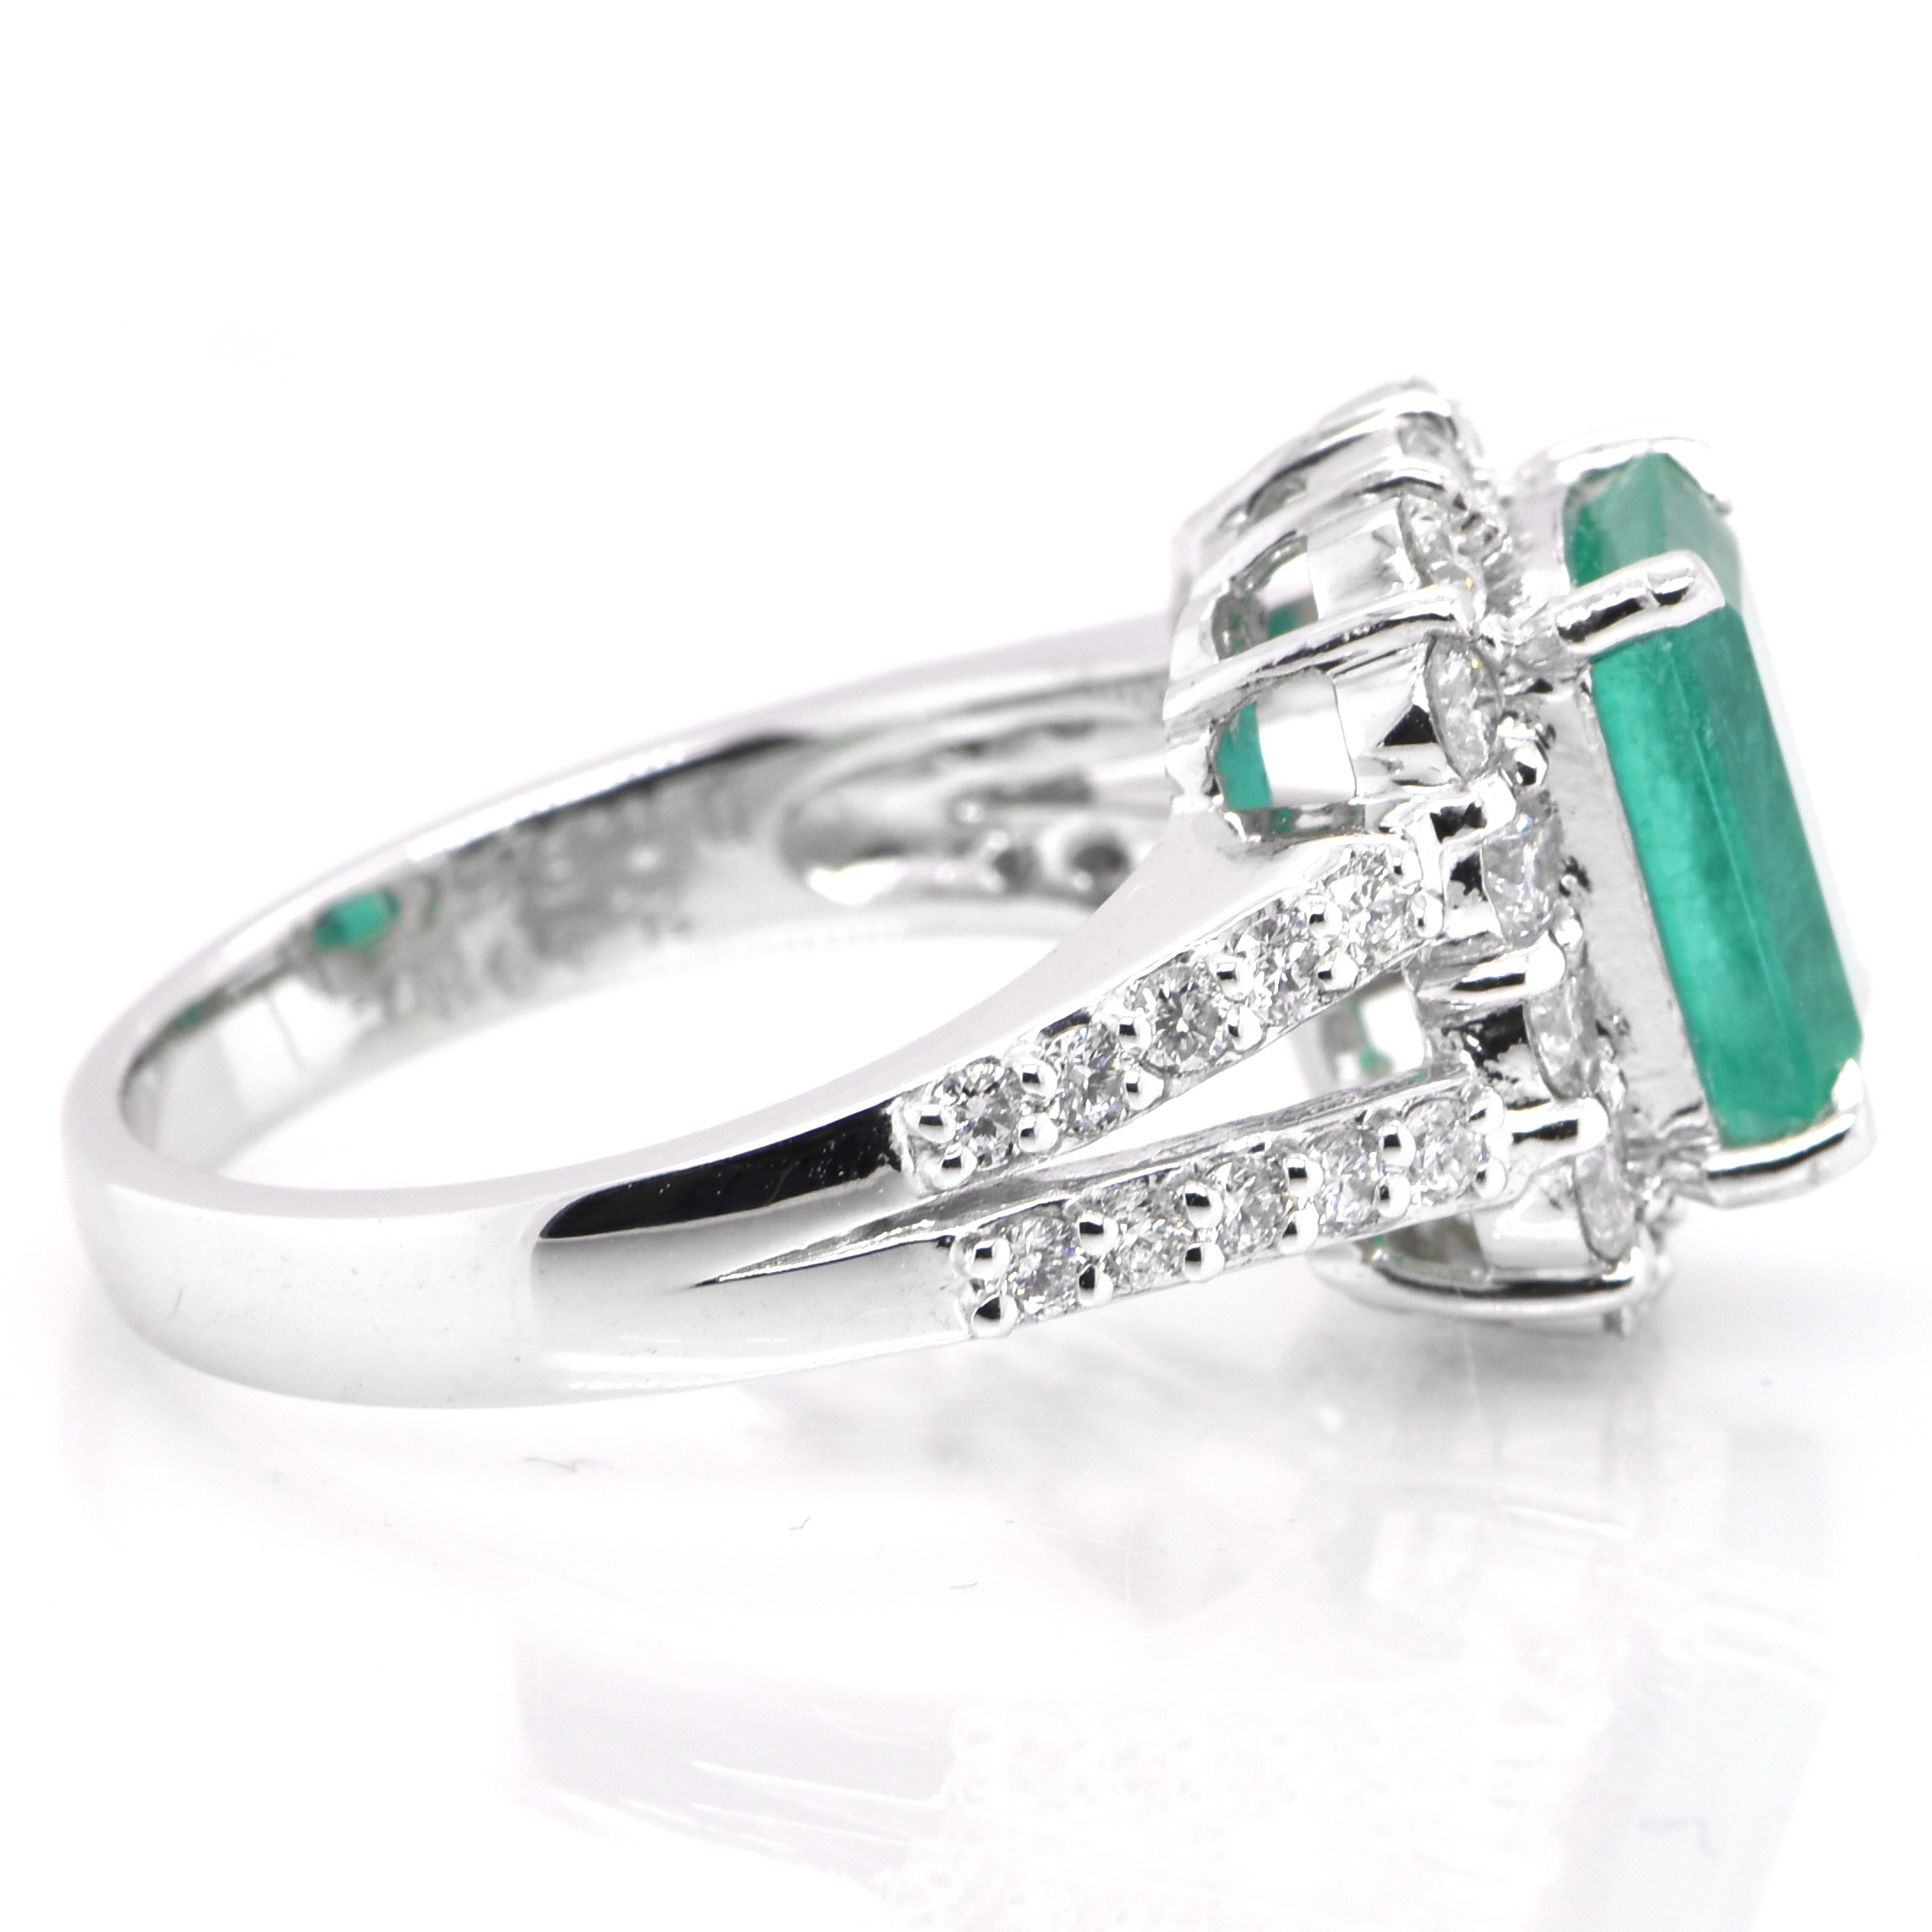 2.49 Carat Colombian Emerald and Diamond Ring Set in Platinum In New Condition For Sale In Tokyo, JP